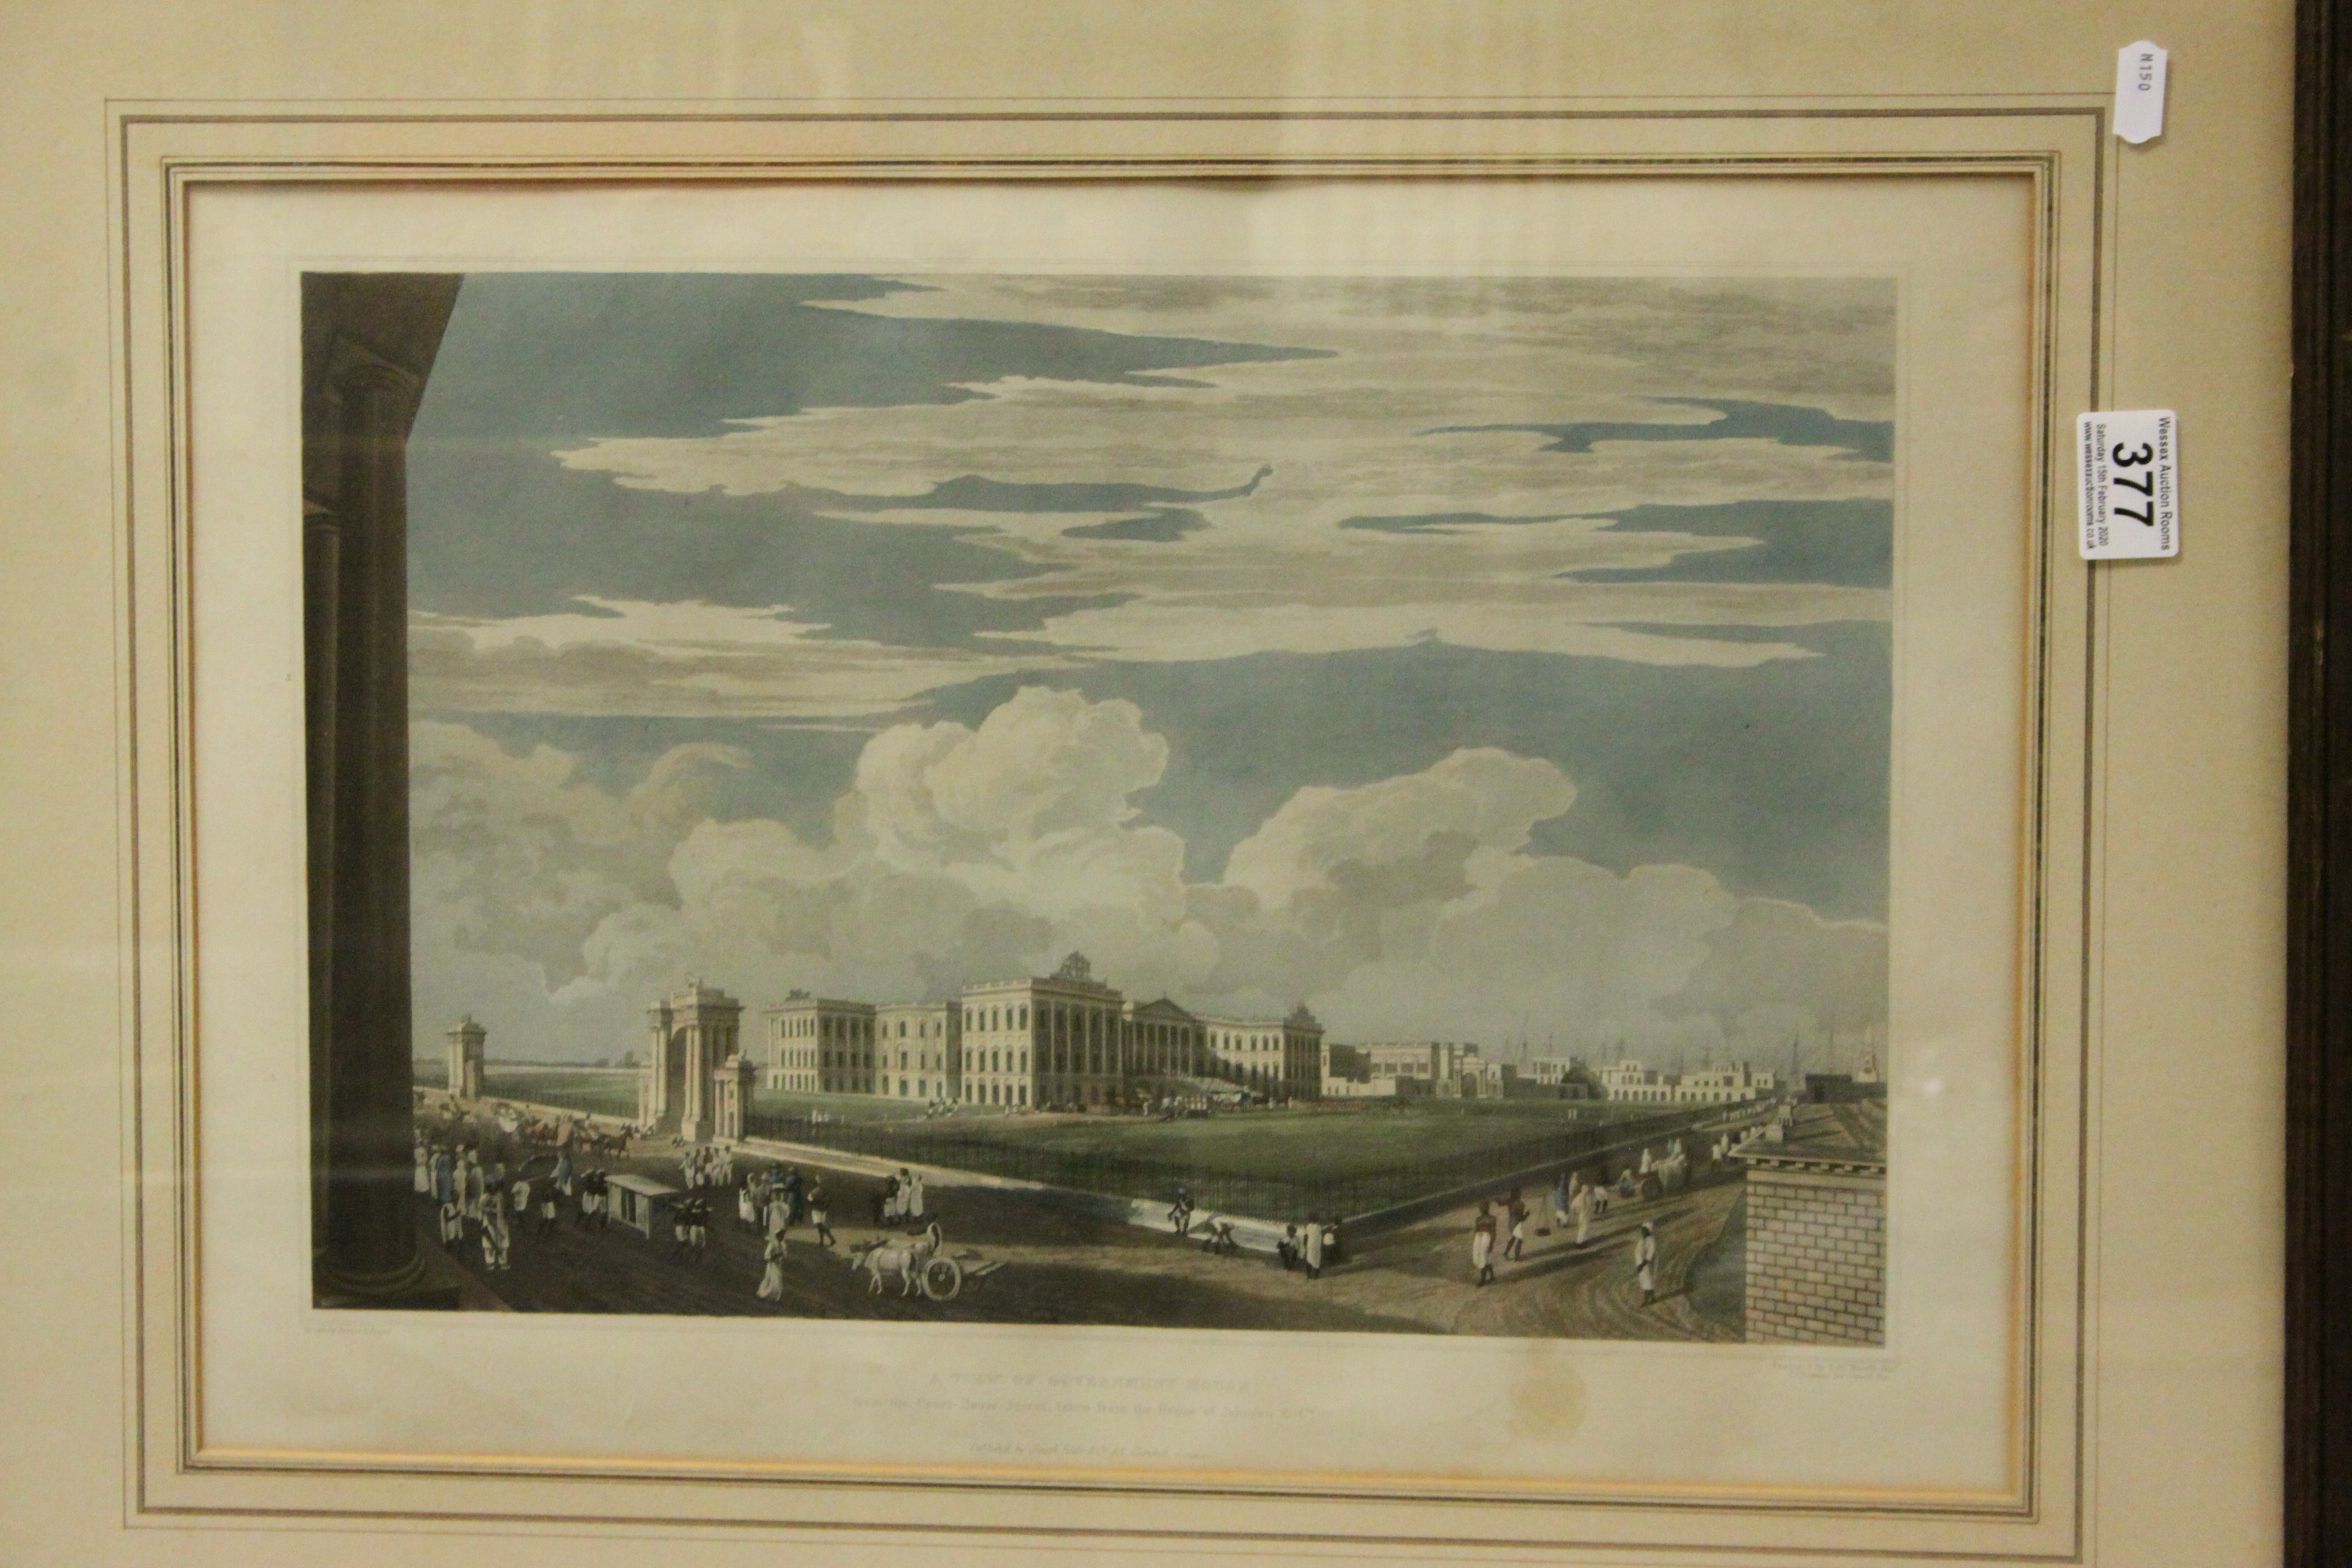 *James Bailey Fraser, aquatint published 1826 by Smith Elder, View of Loll Bazaar & aquatint by - Image 2 of 6